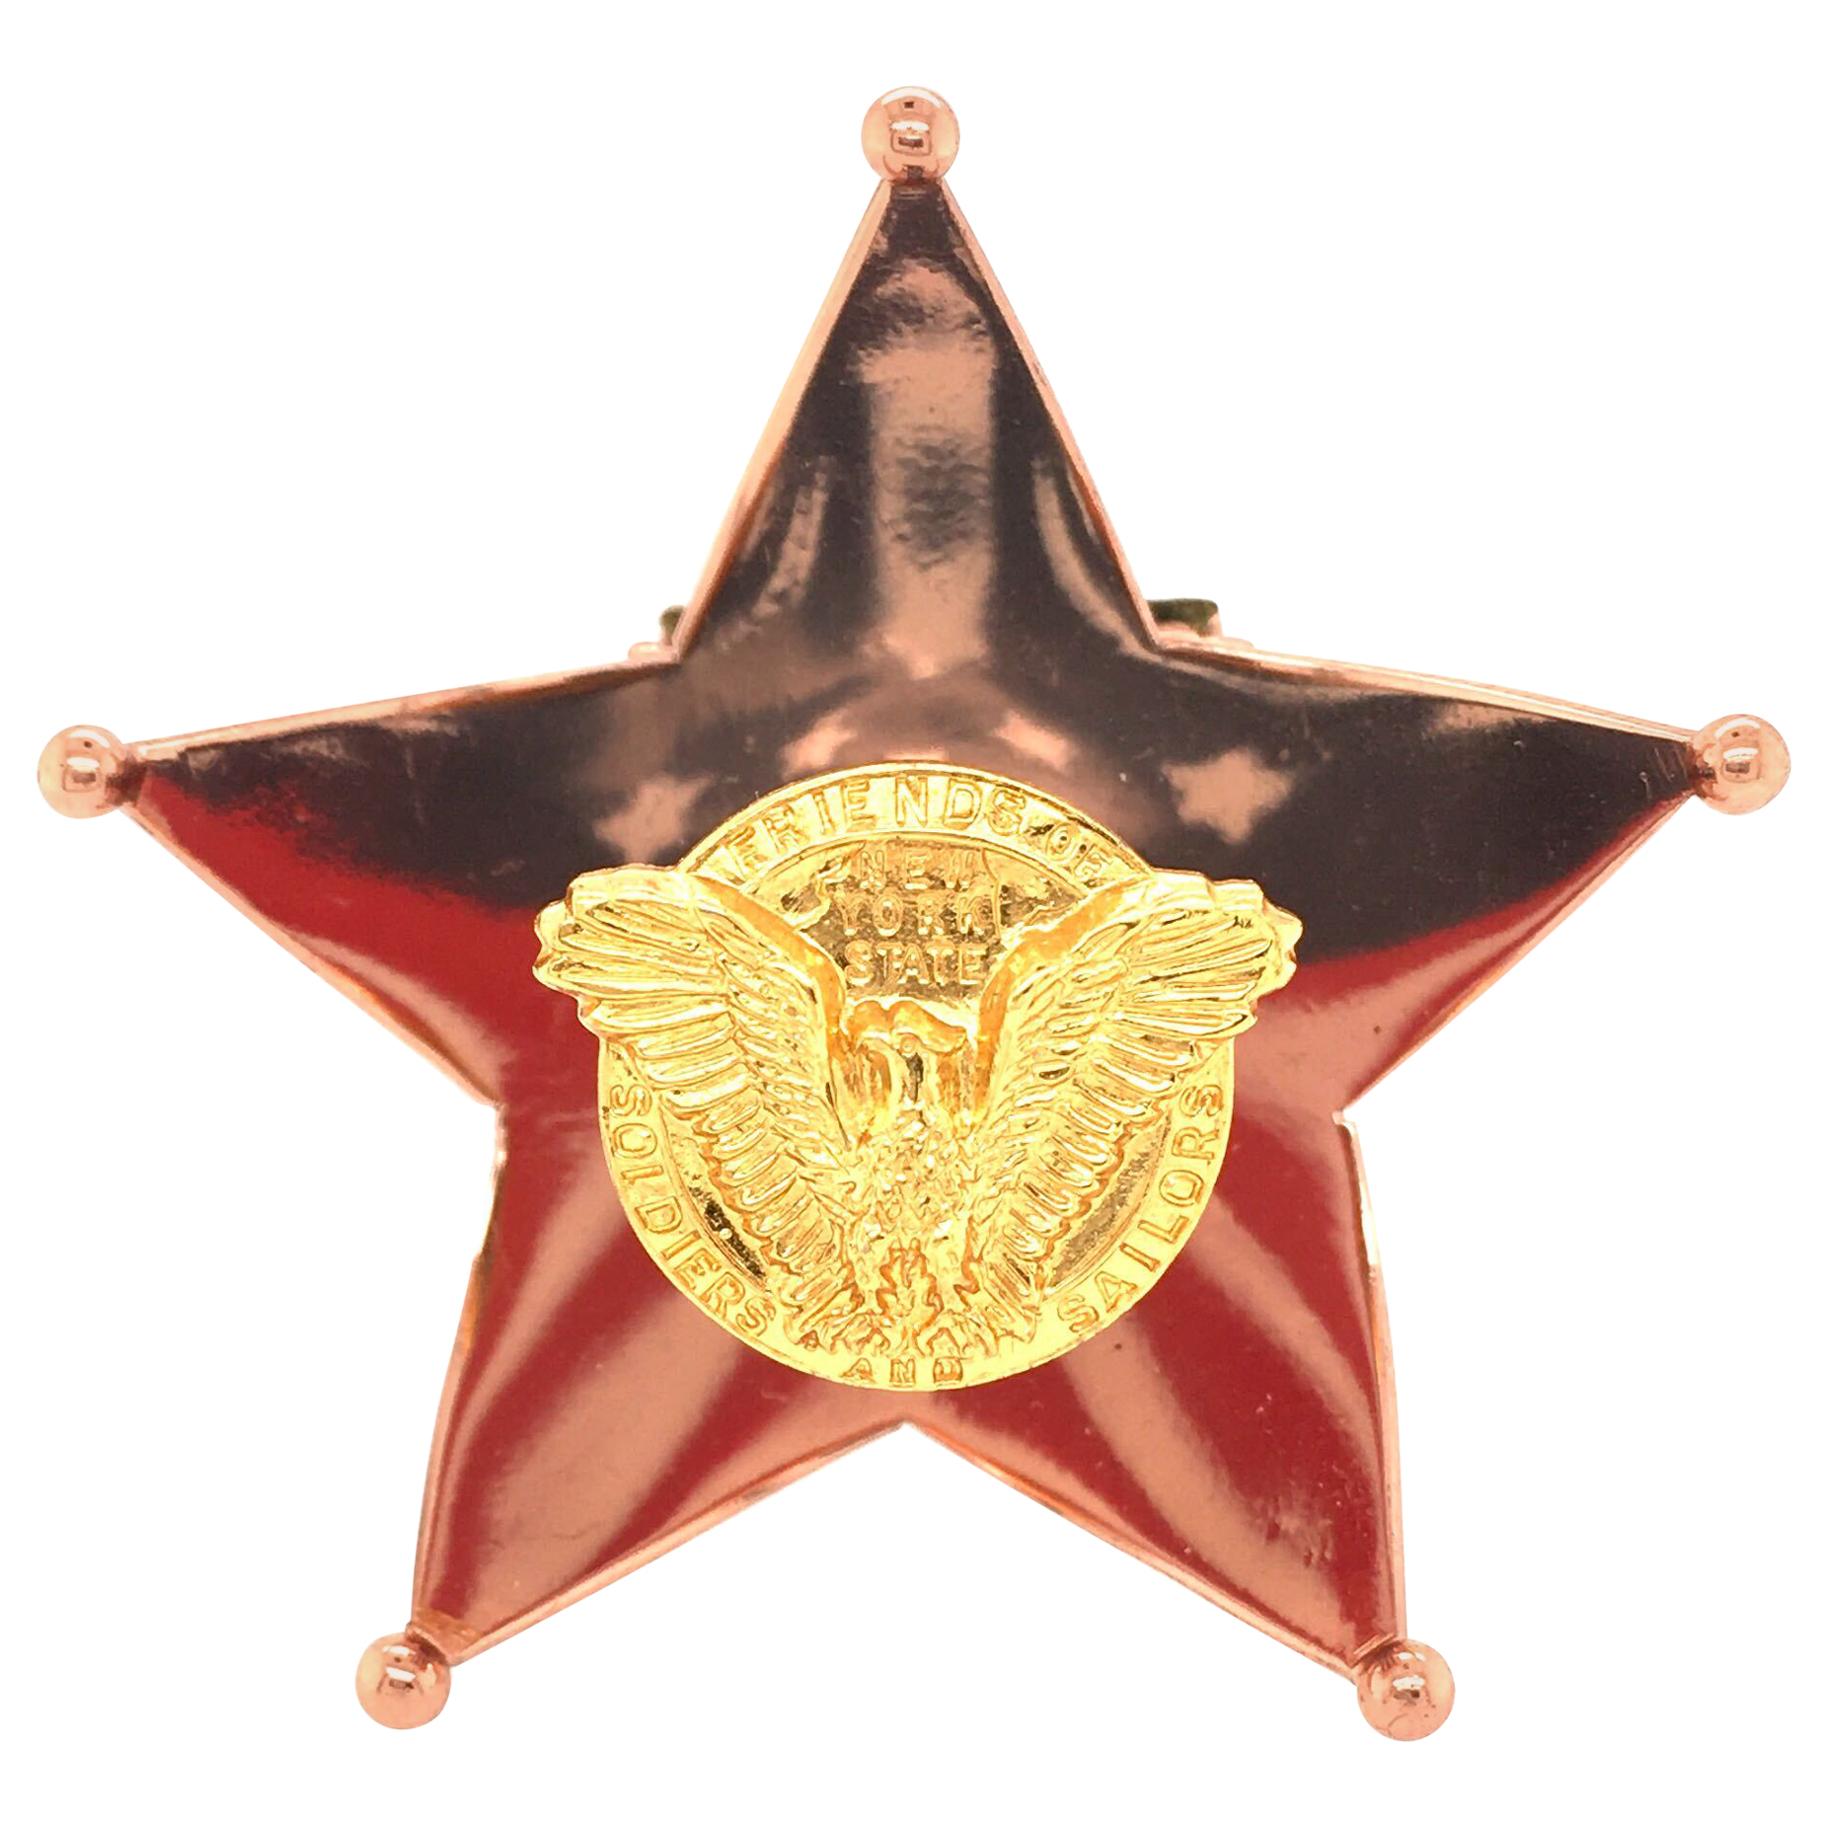 Cartier Enamel and Gilt Metal Stars and Stripes Brooch